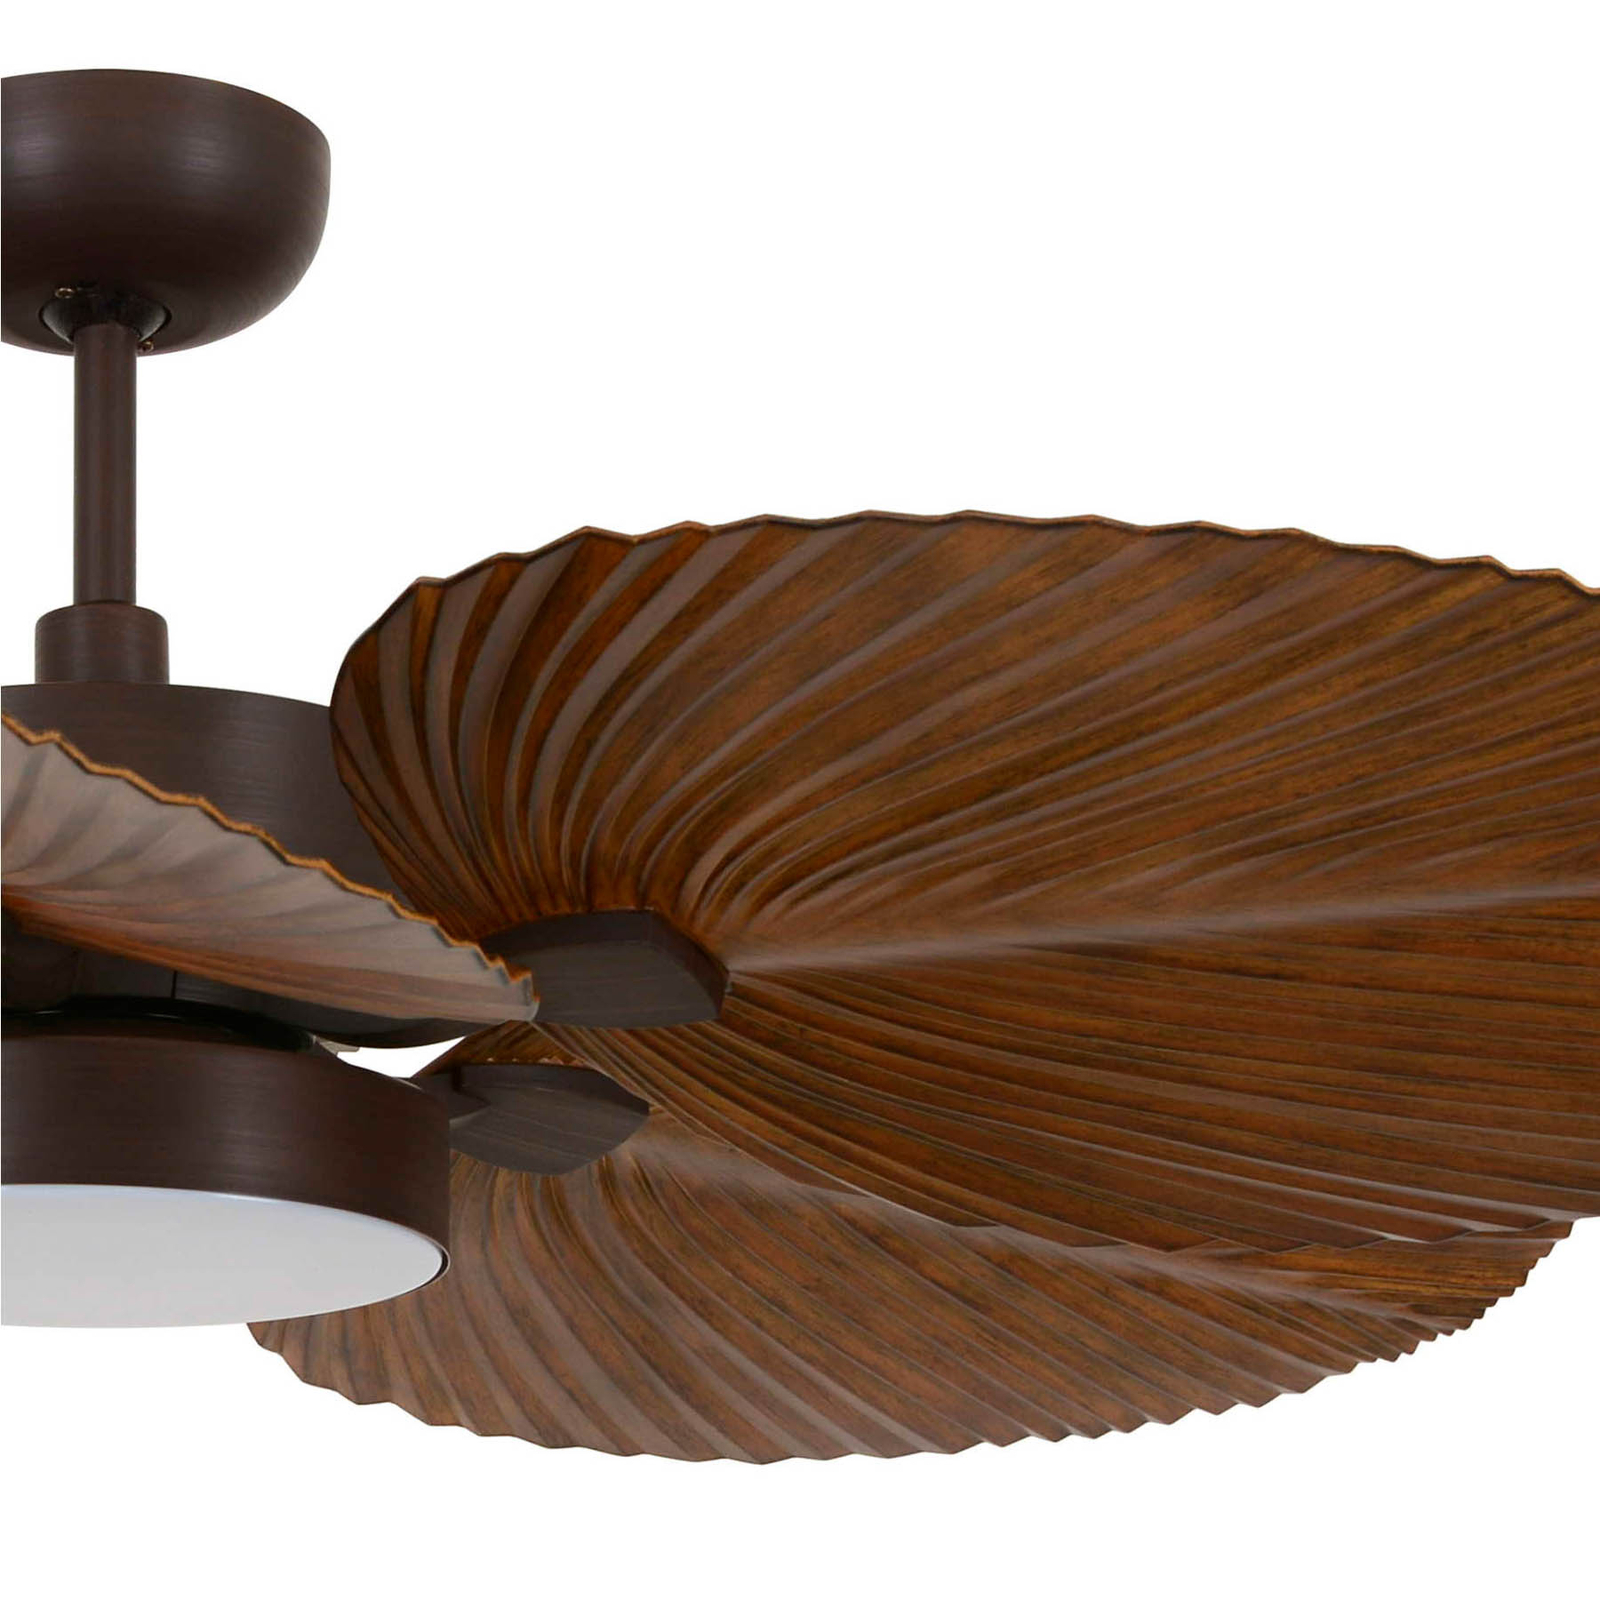 Beacon ceiling fan with light Bali, bronze-coloured, quiet